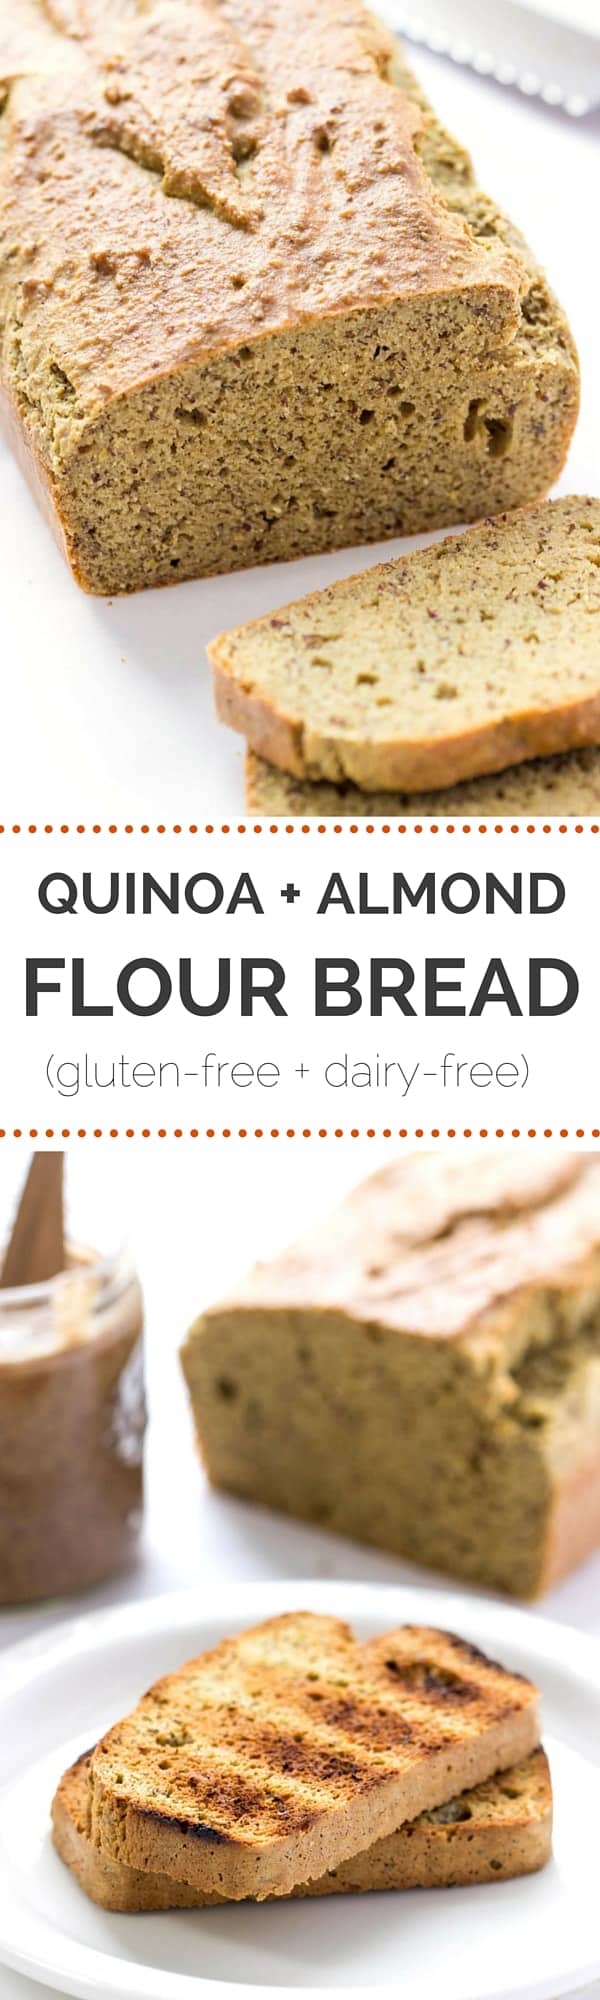 The EASIEST gluten-free bread you'll ever make -- a quinoa almond flour bread uses no yeast, bakes in 30 minutes, is made in one bowl AND it tastes amazing!